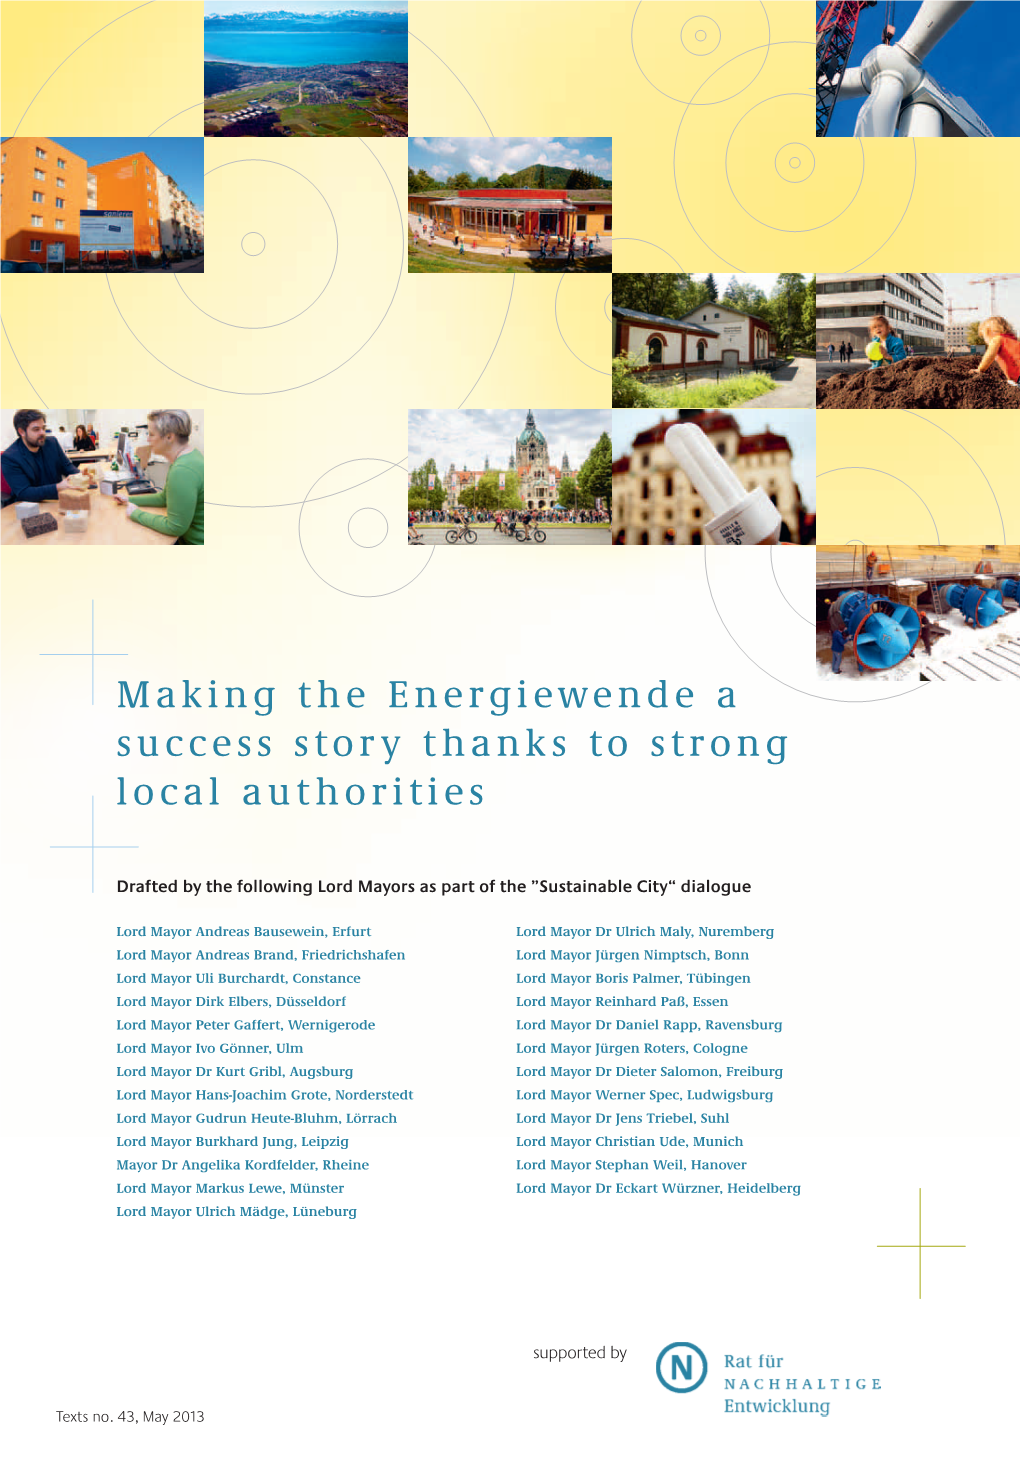 Making the Energiewende a Success Story Thanks to Strong Local Authorities